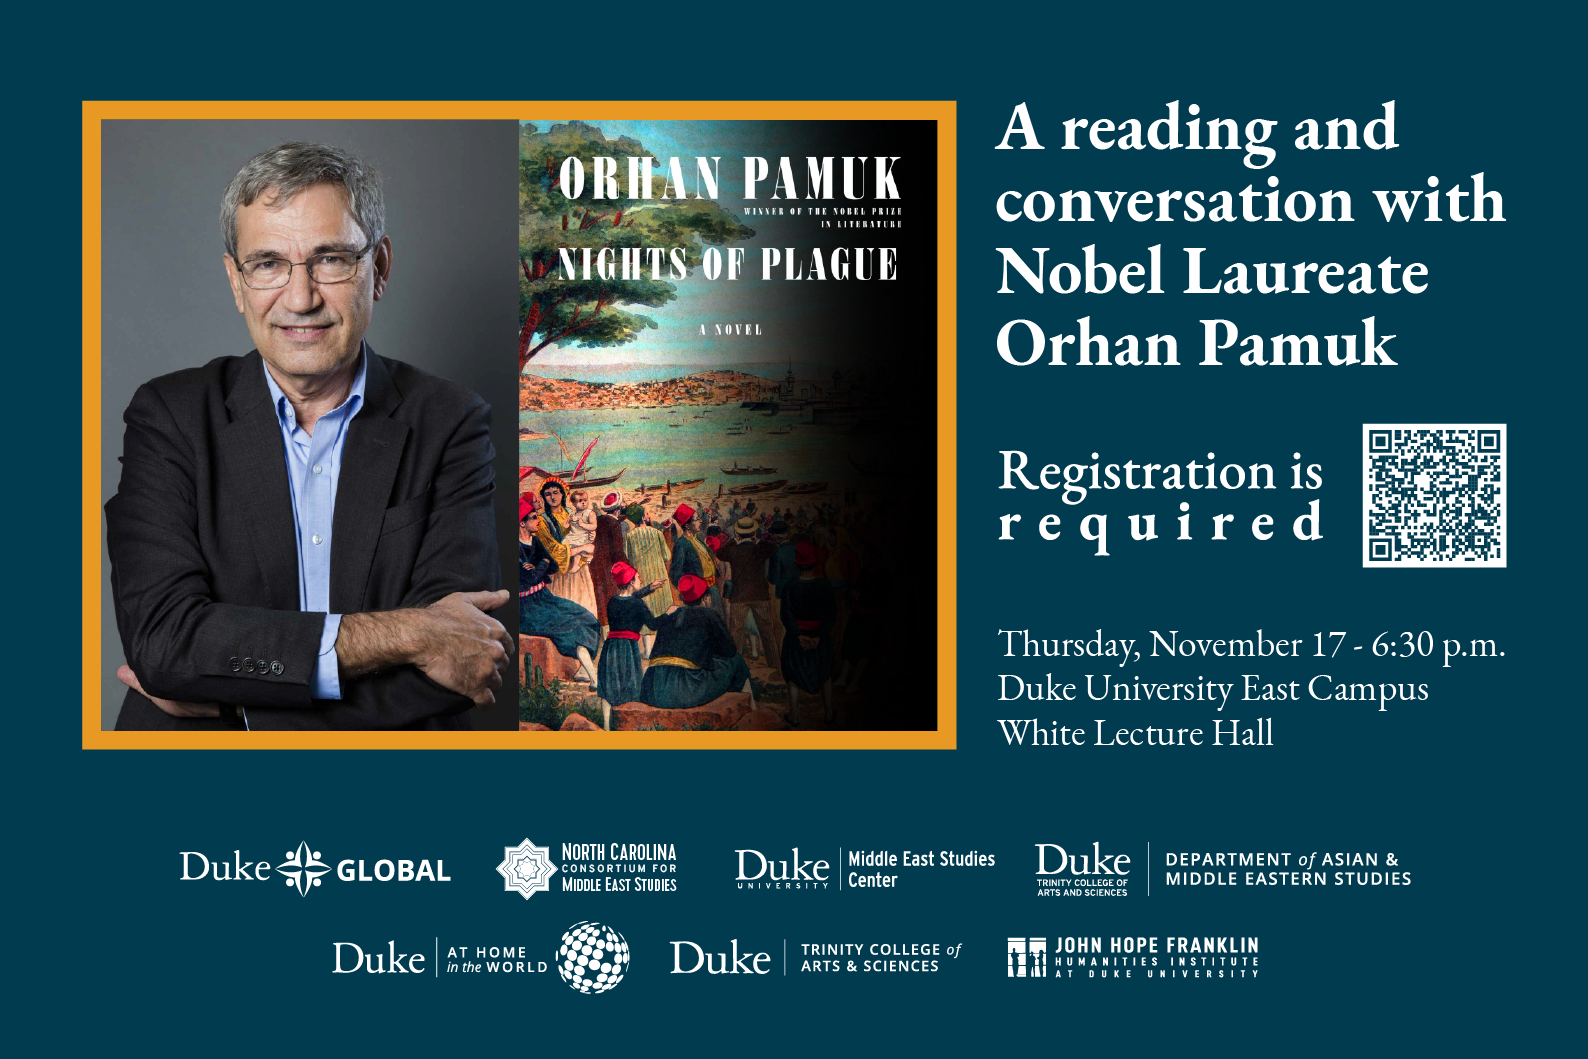 &quot;Nights of Plague&quot; Novel Reading by Nobel Laureate Orhan Pamuk &amp; Conversation with Erdağ Göknar, Thursday, November 17th, 6:30 – 8:00 p.m., White Lecture Hall, East Campus